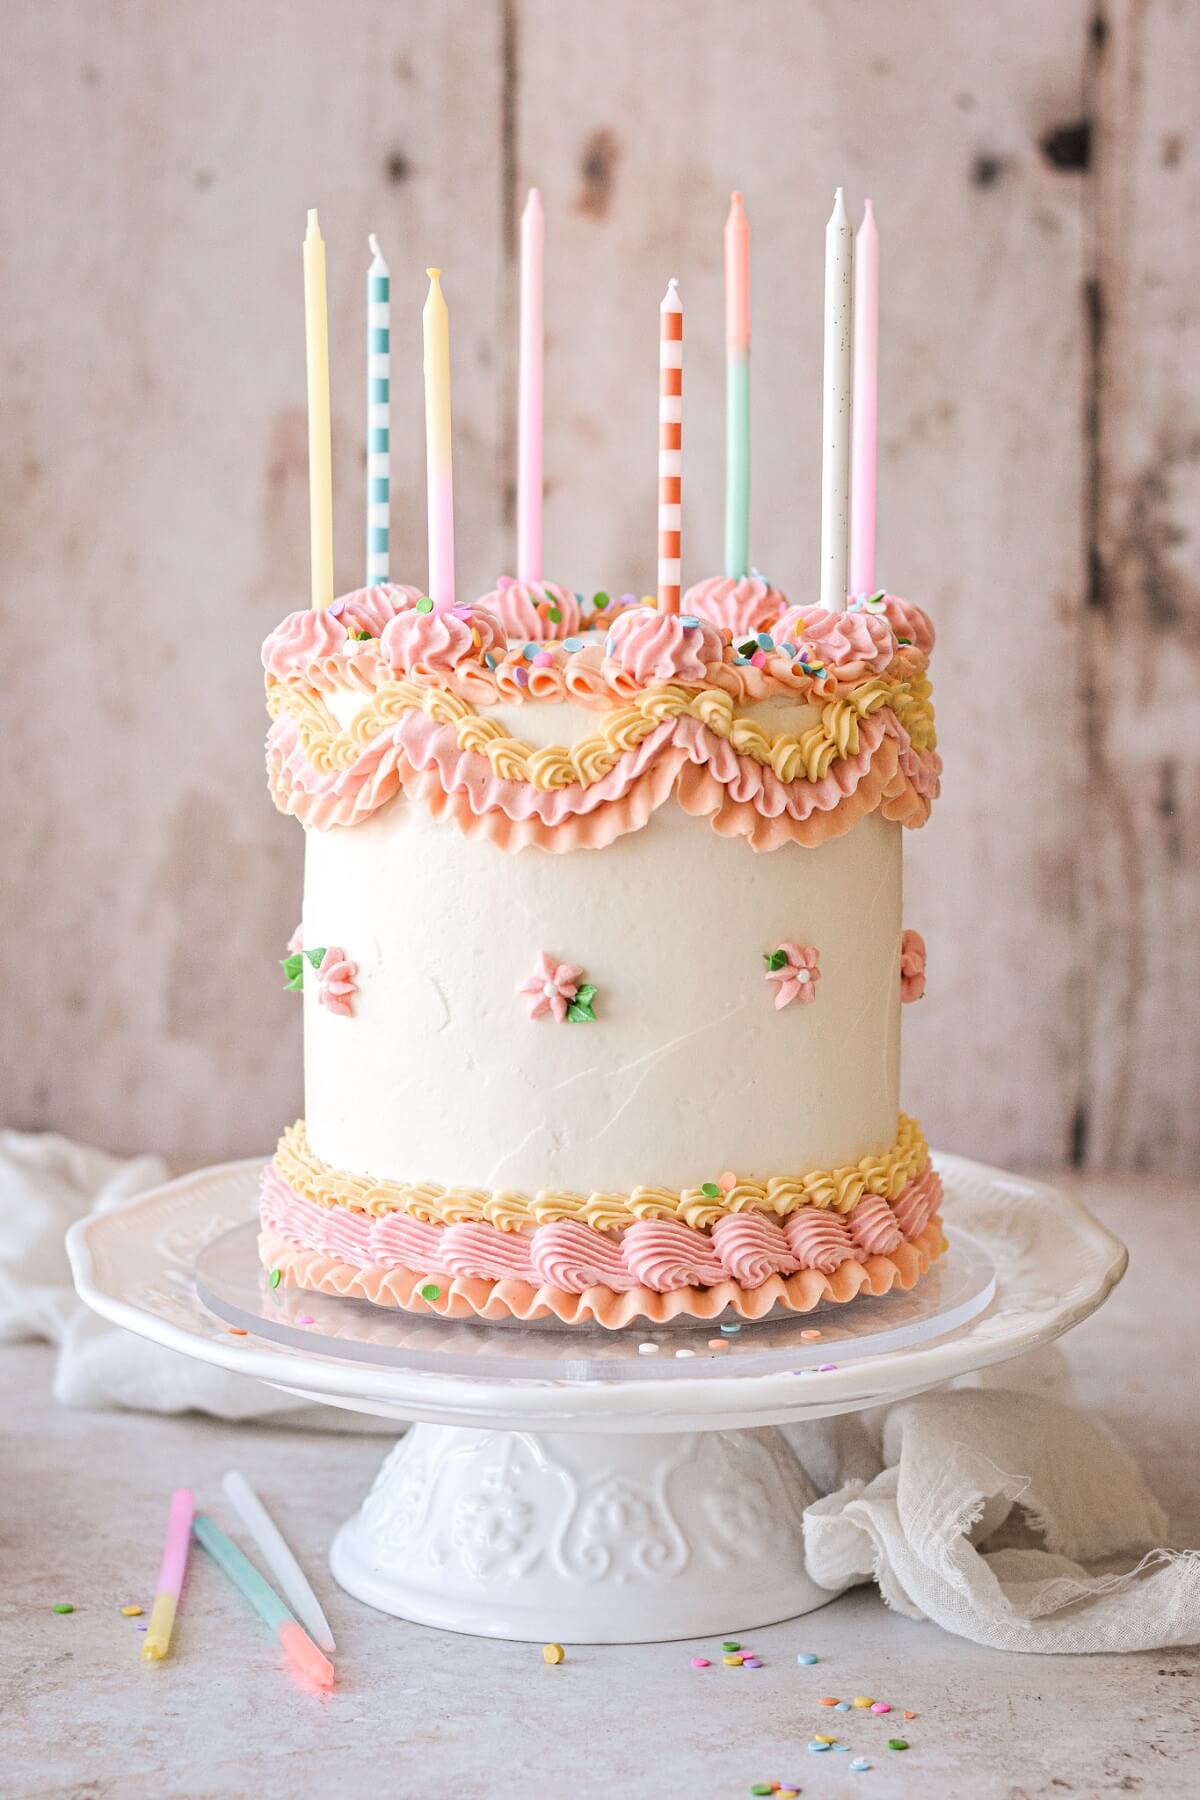 40 Cute Cake Ideas For Any Celebration  Pastel TwoTiered Cake